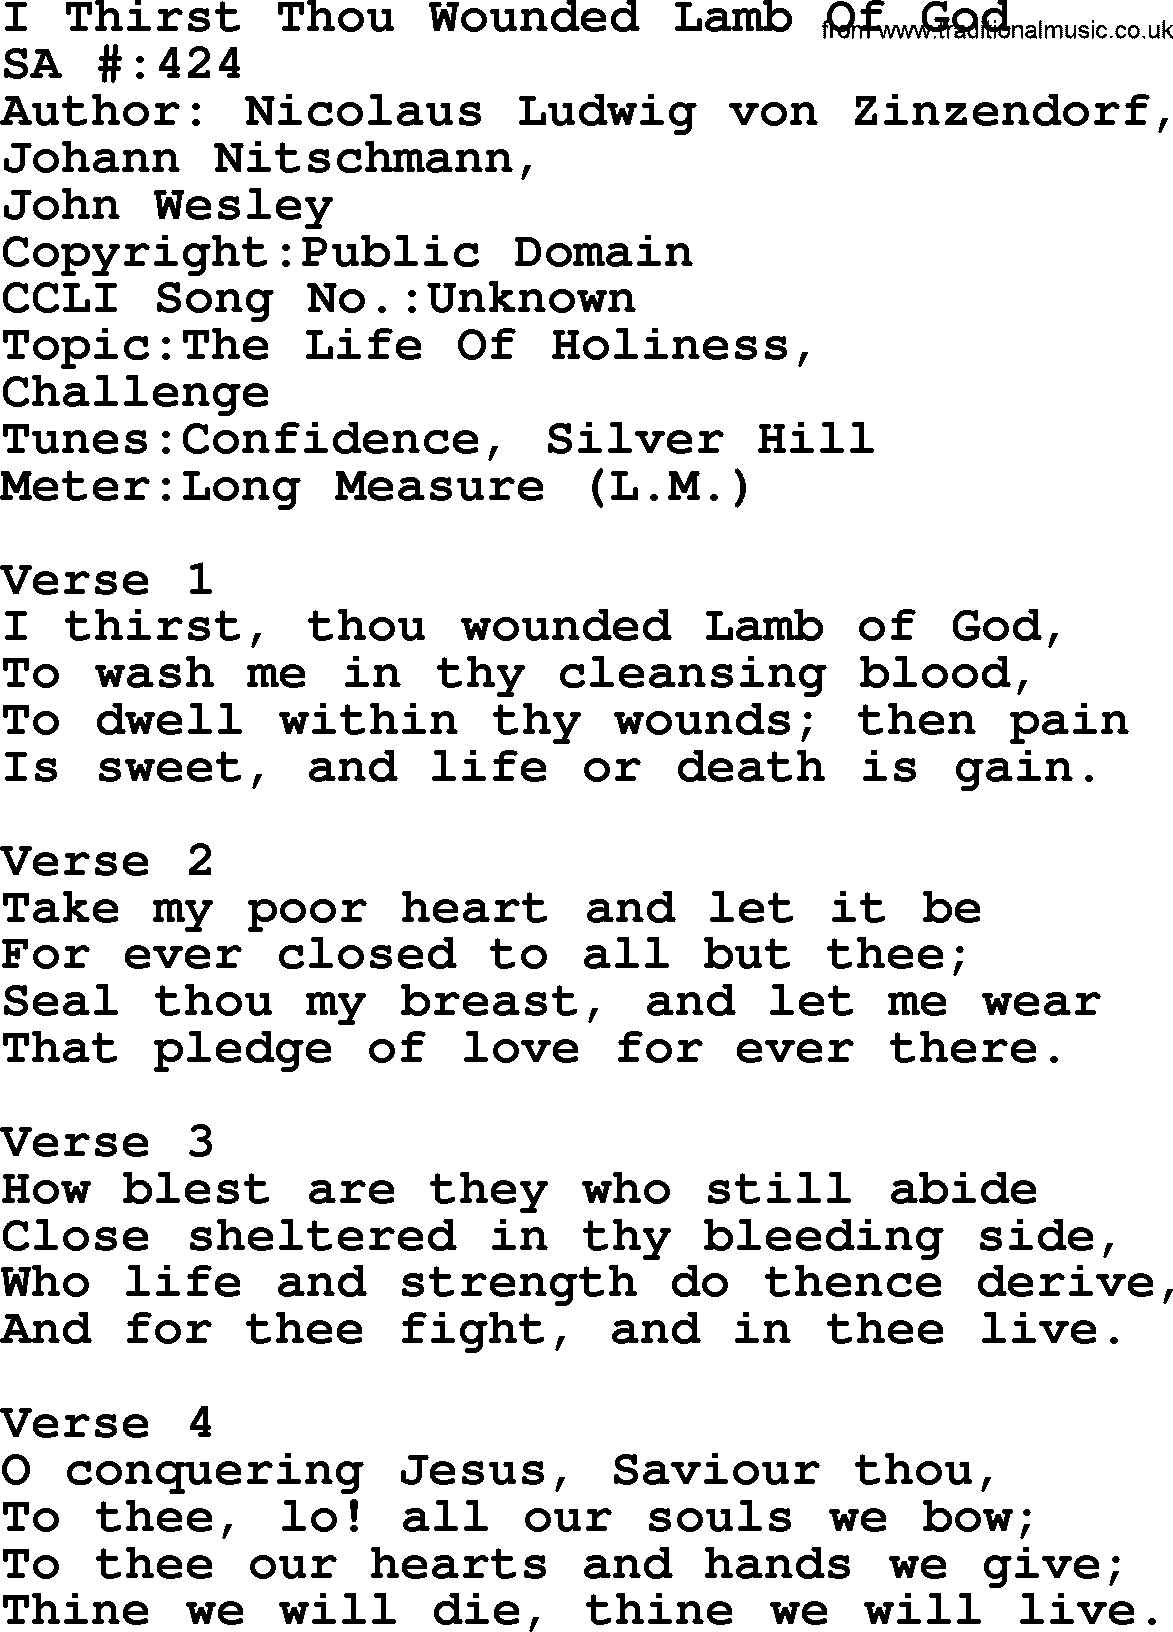 Salvation Army Hymnal, title: I Thirst Thou Wounded Lamb Of God, with lyrics and PDF,